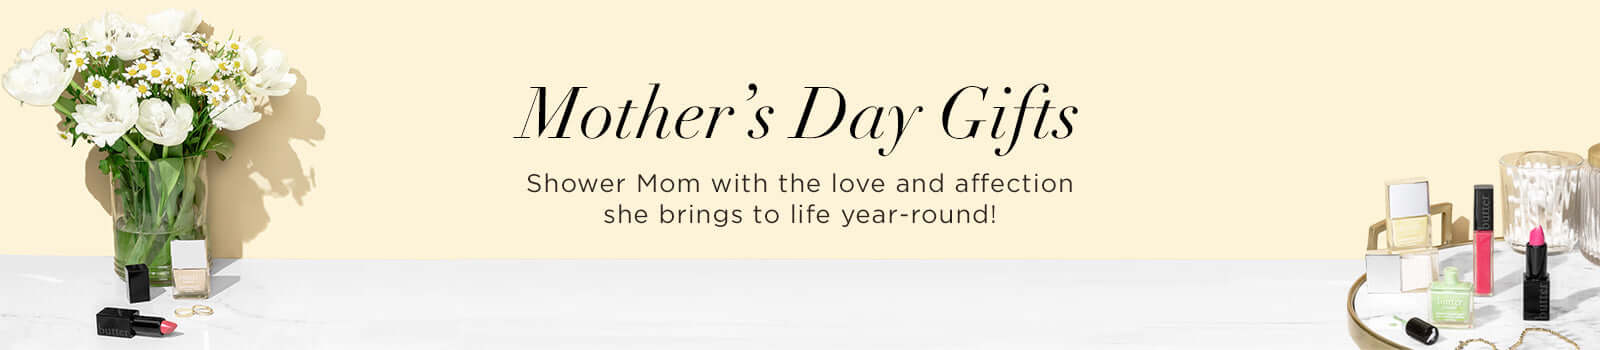 Mother's Day Gifts - butterlondon-shop